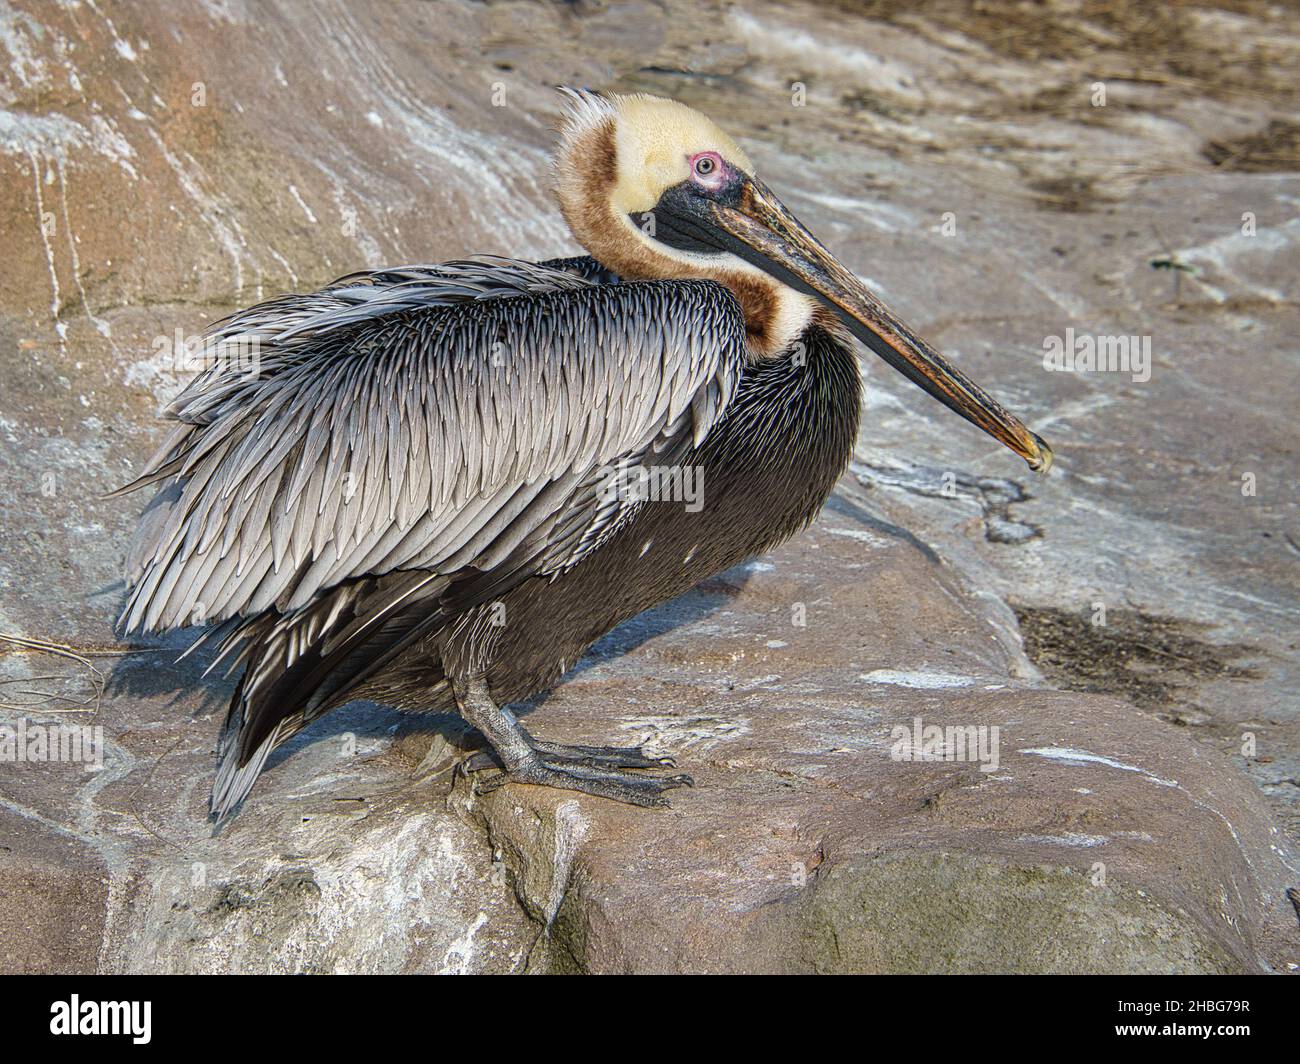 pelican recorded on a rock. large seabird with richly textured plumage. Bird in portrait. Stock Photo